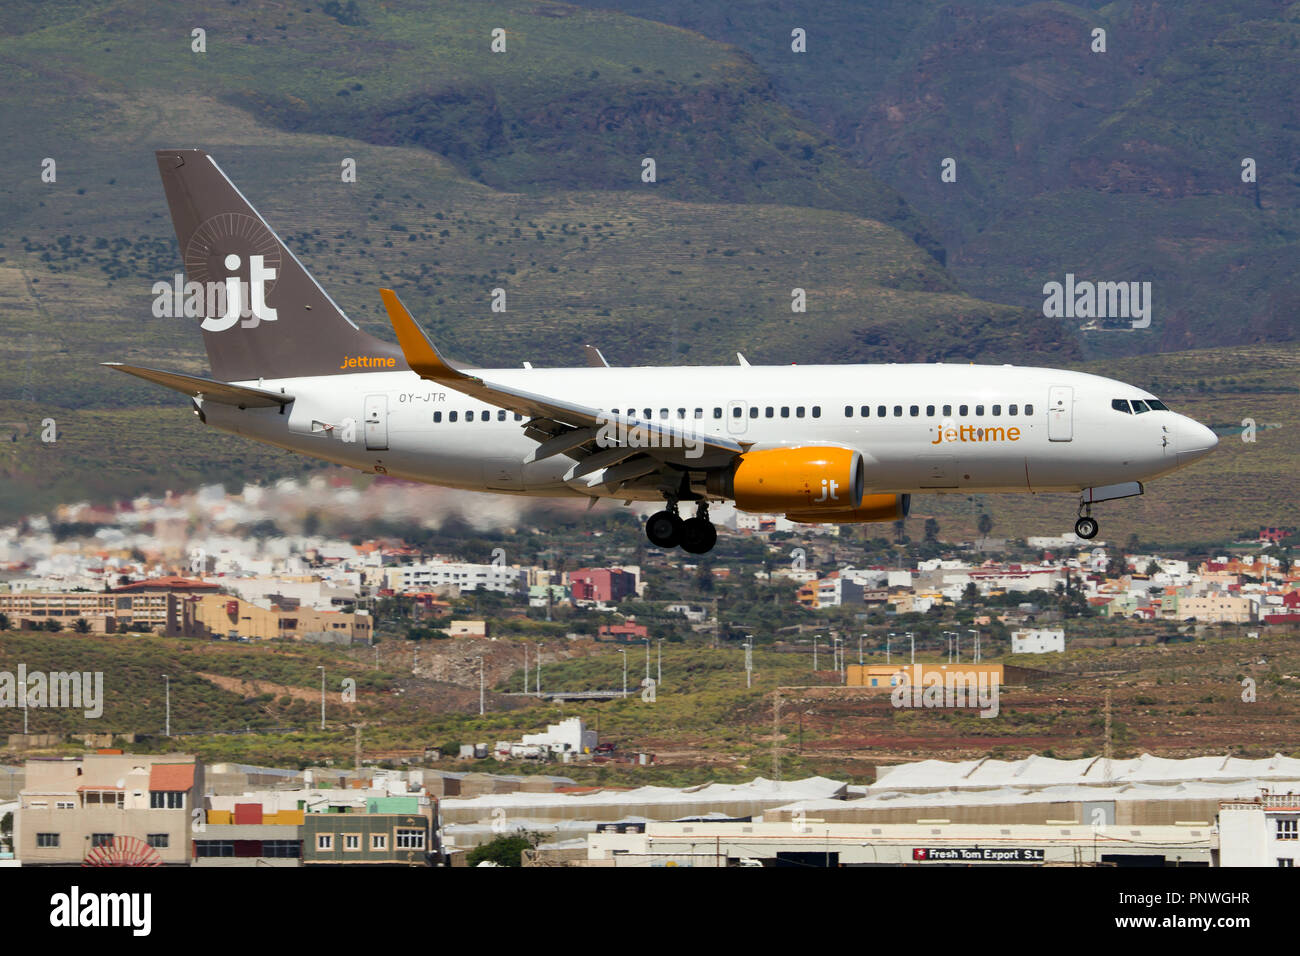 A Jettime Boeing 737-700 seen a few seconds before landing at Gran Canaria, Las Palmas airport. Stock Photo